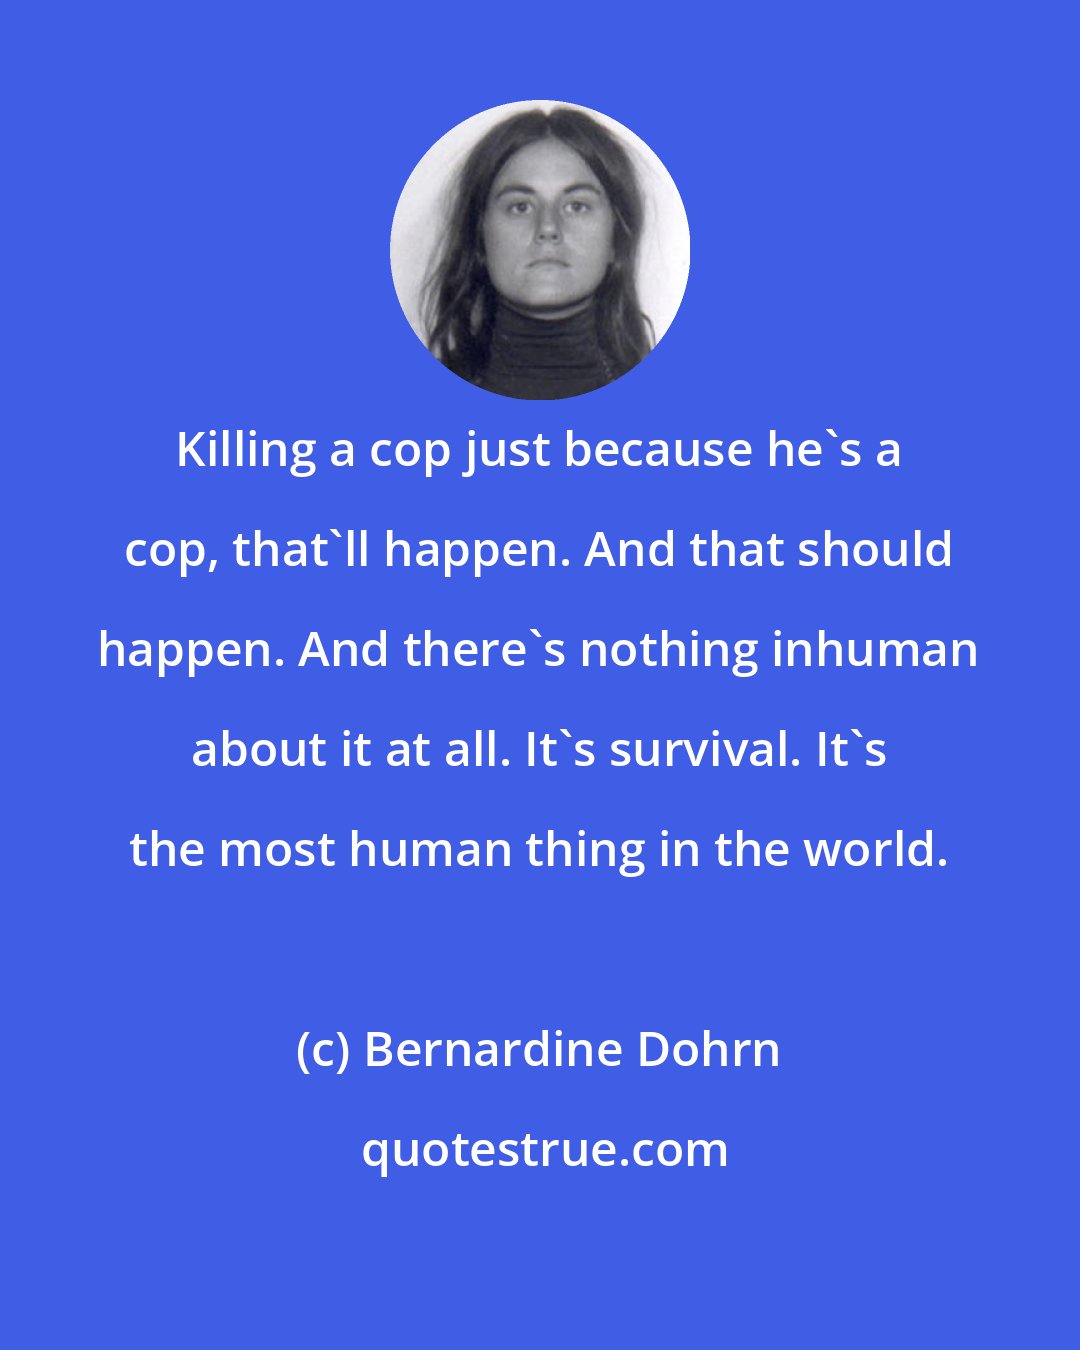 Bernardine Dohrn: Killing a cop just because he's a cop, that'll happen. And that should happen. And there's nothing inhuman about it at all. It's survival. It's the most human thing in the world.